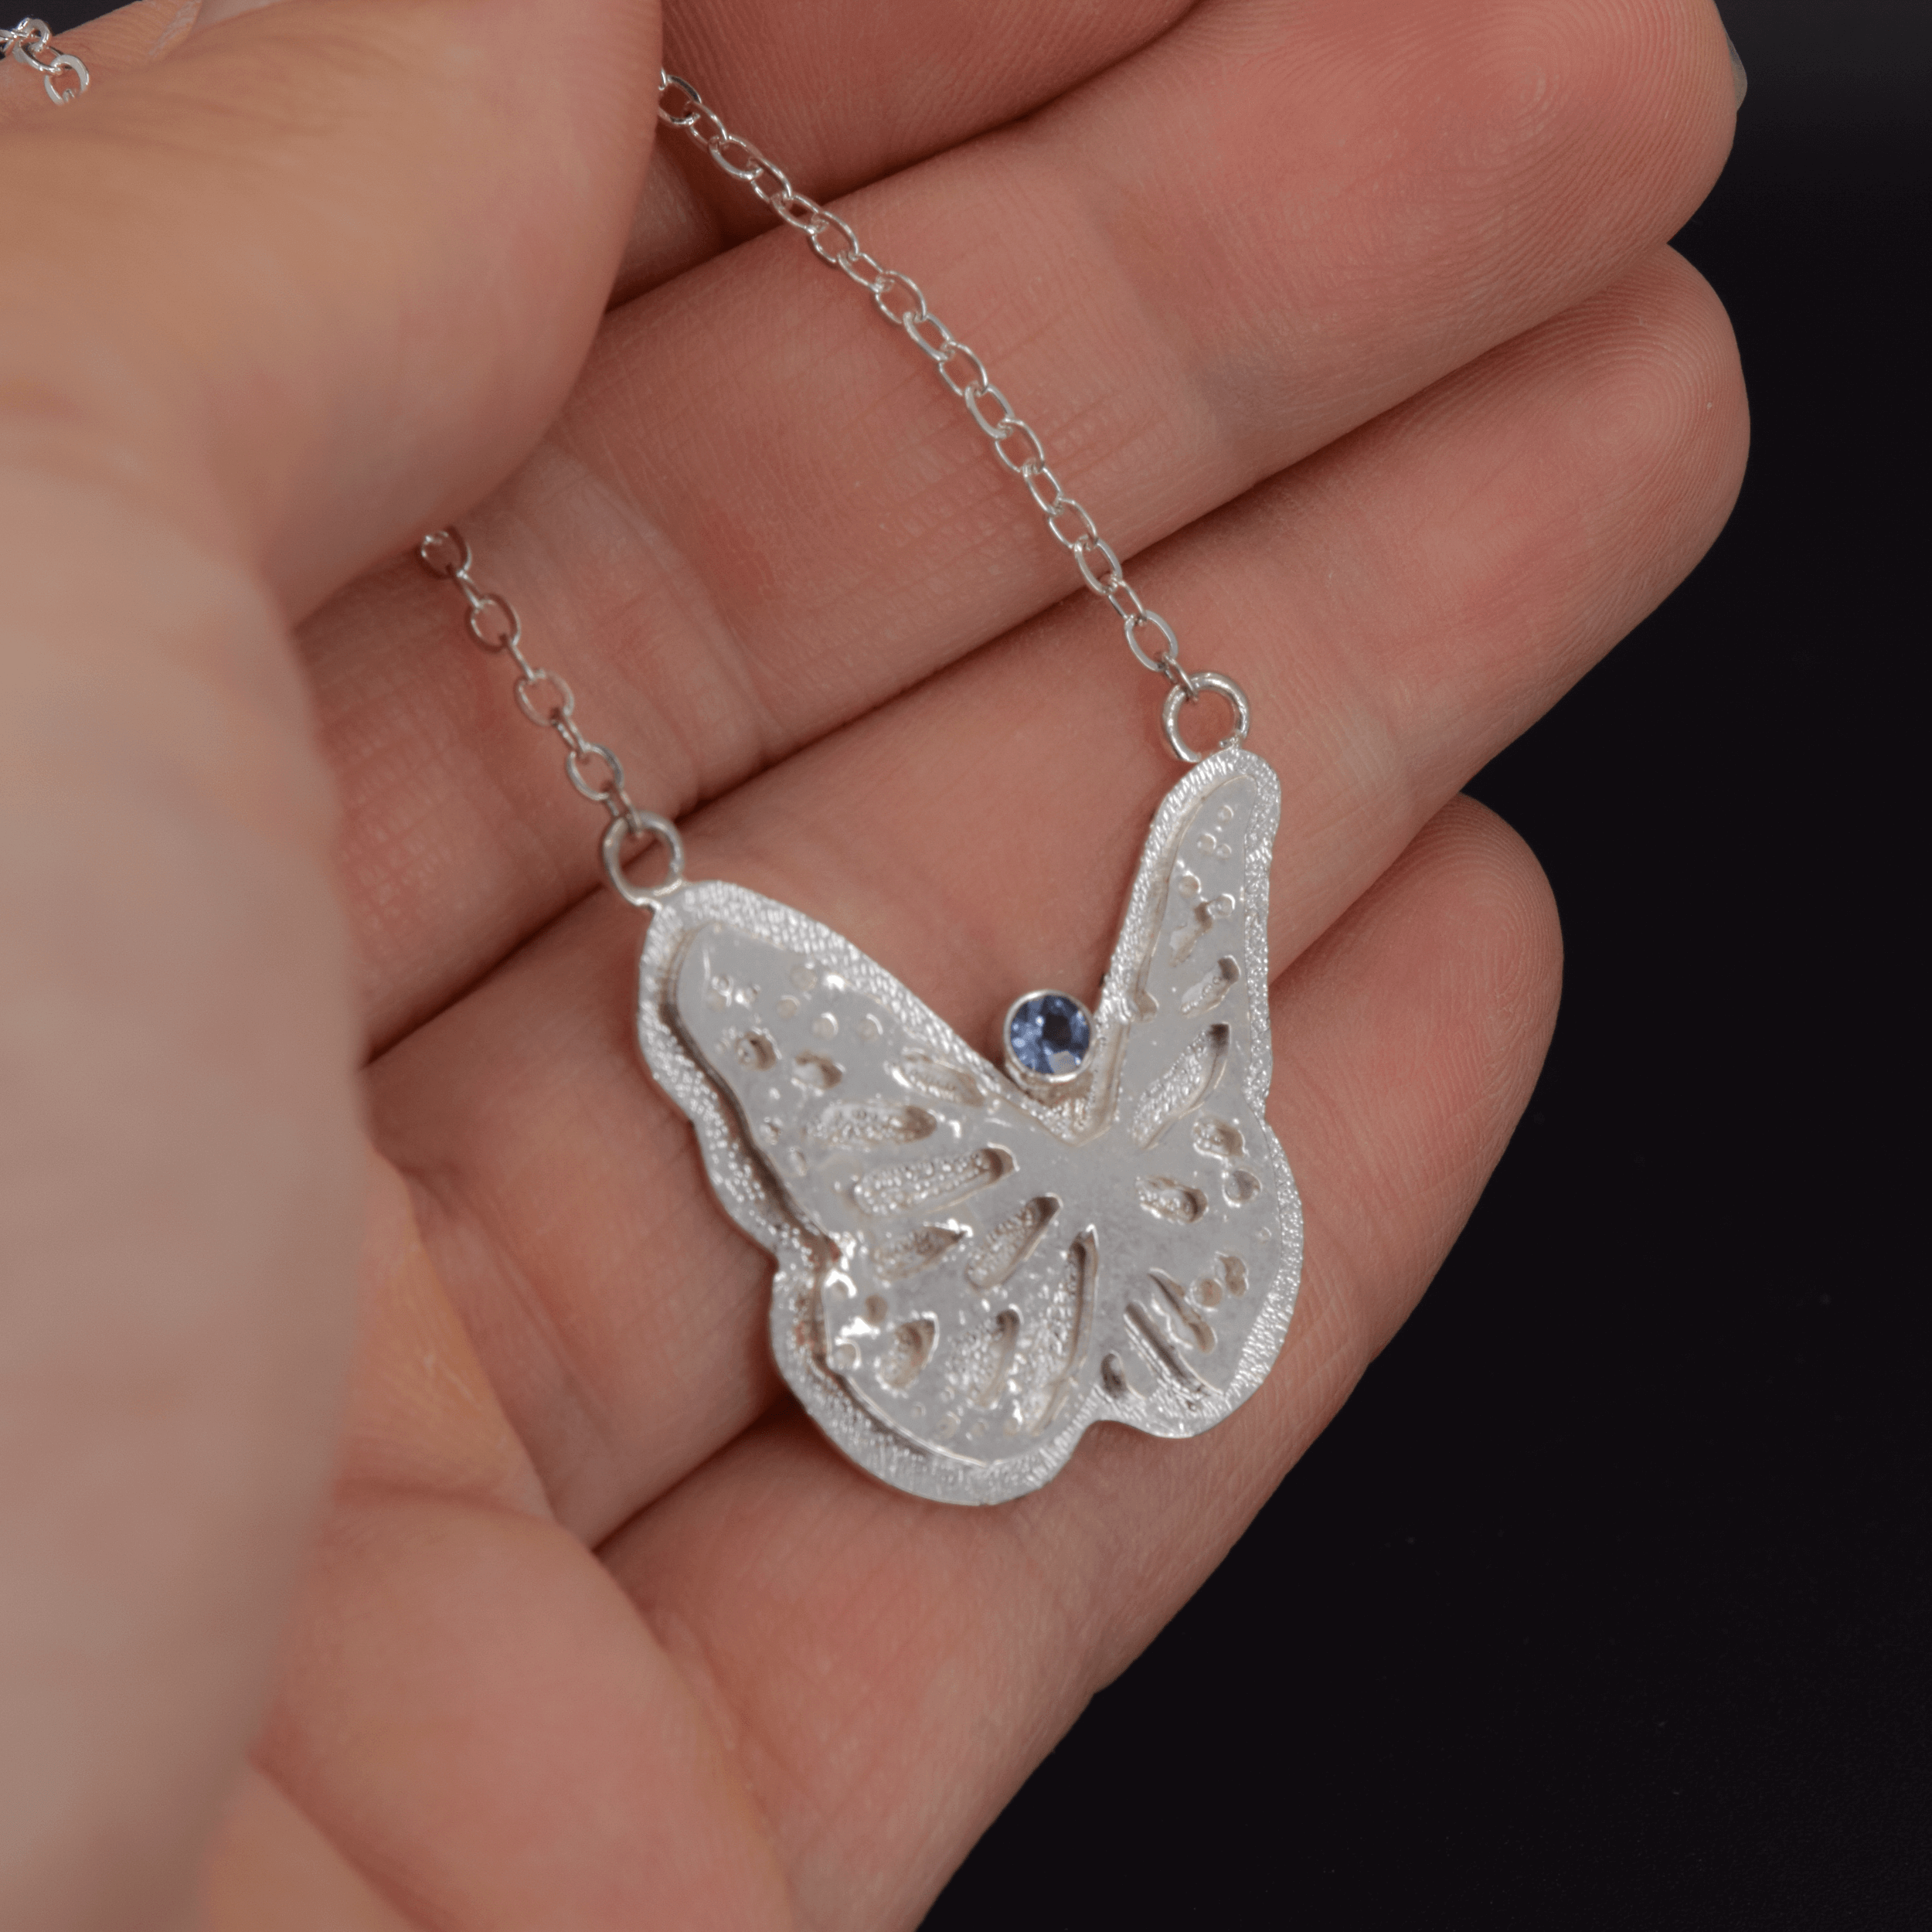 Large butterfly necklace in sterling silver with a faceted Teal Montana Sapphire round stone shown in hand for scale